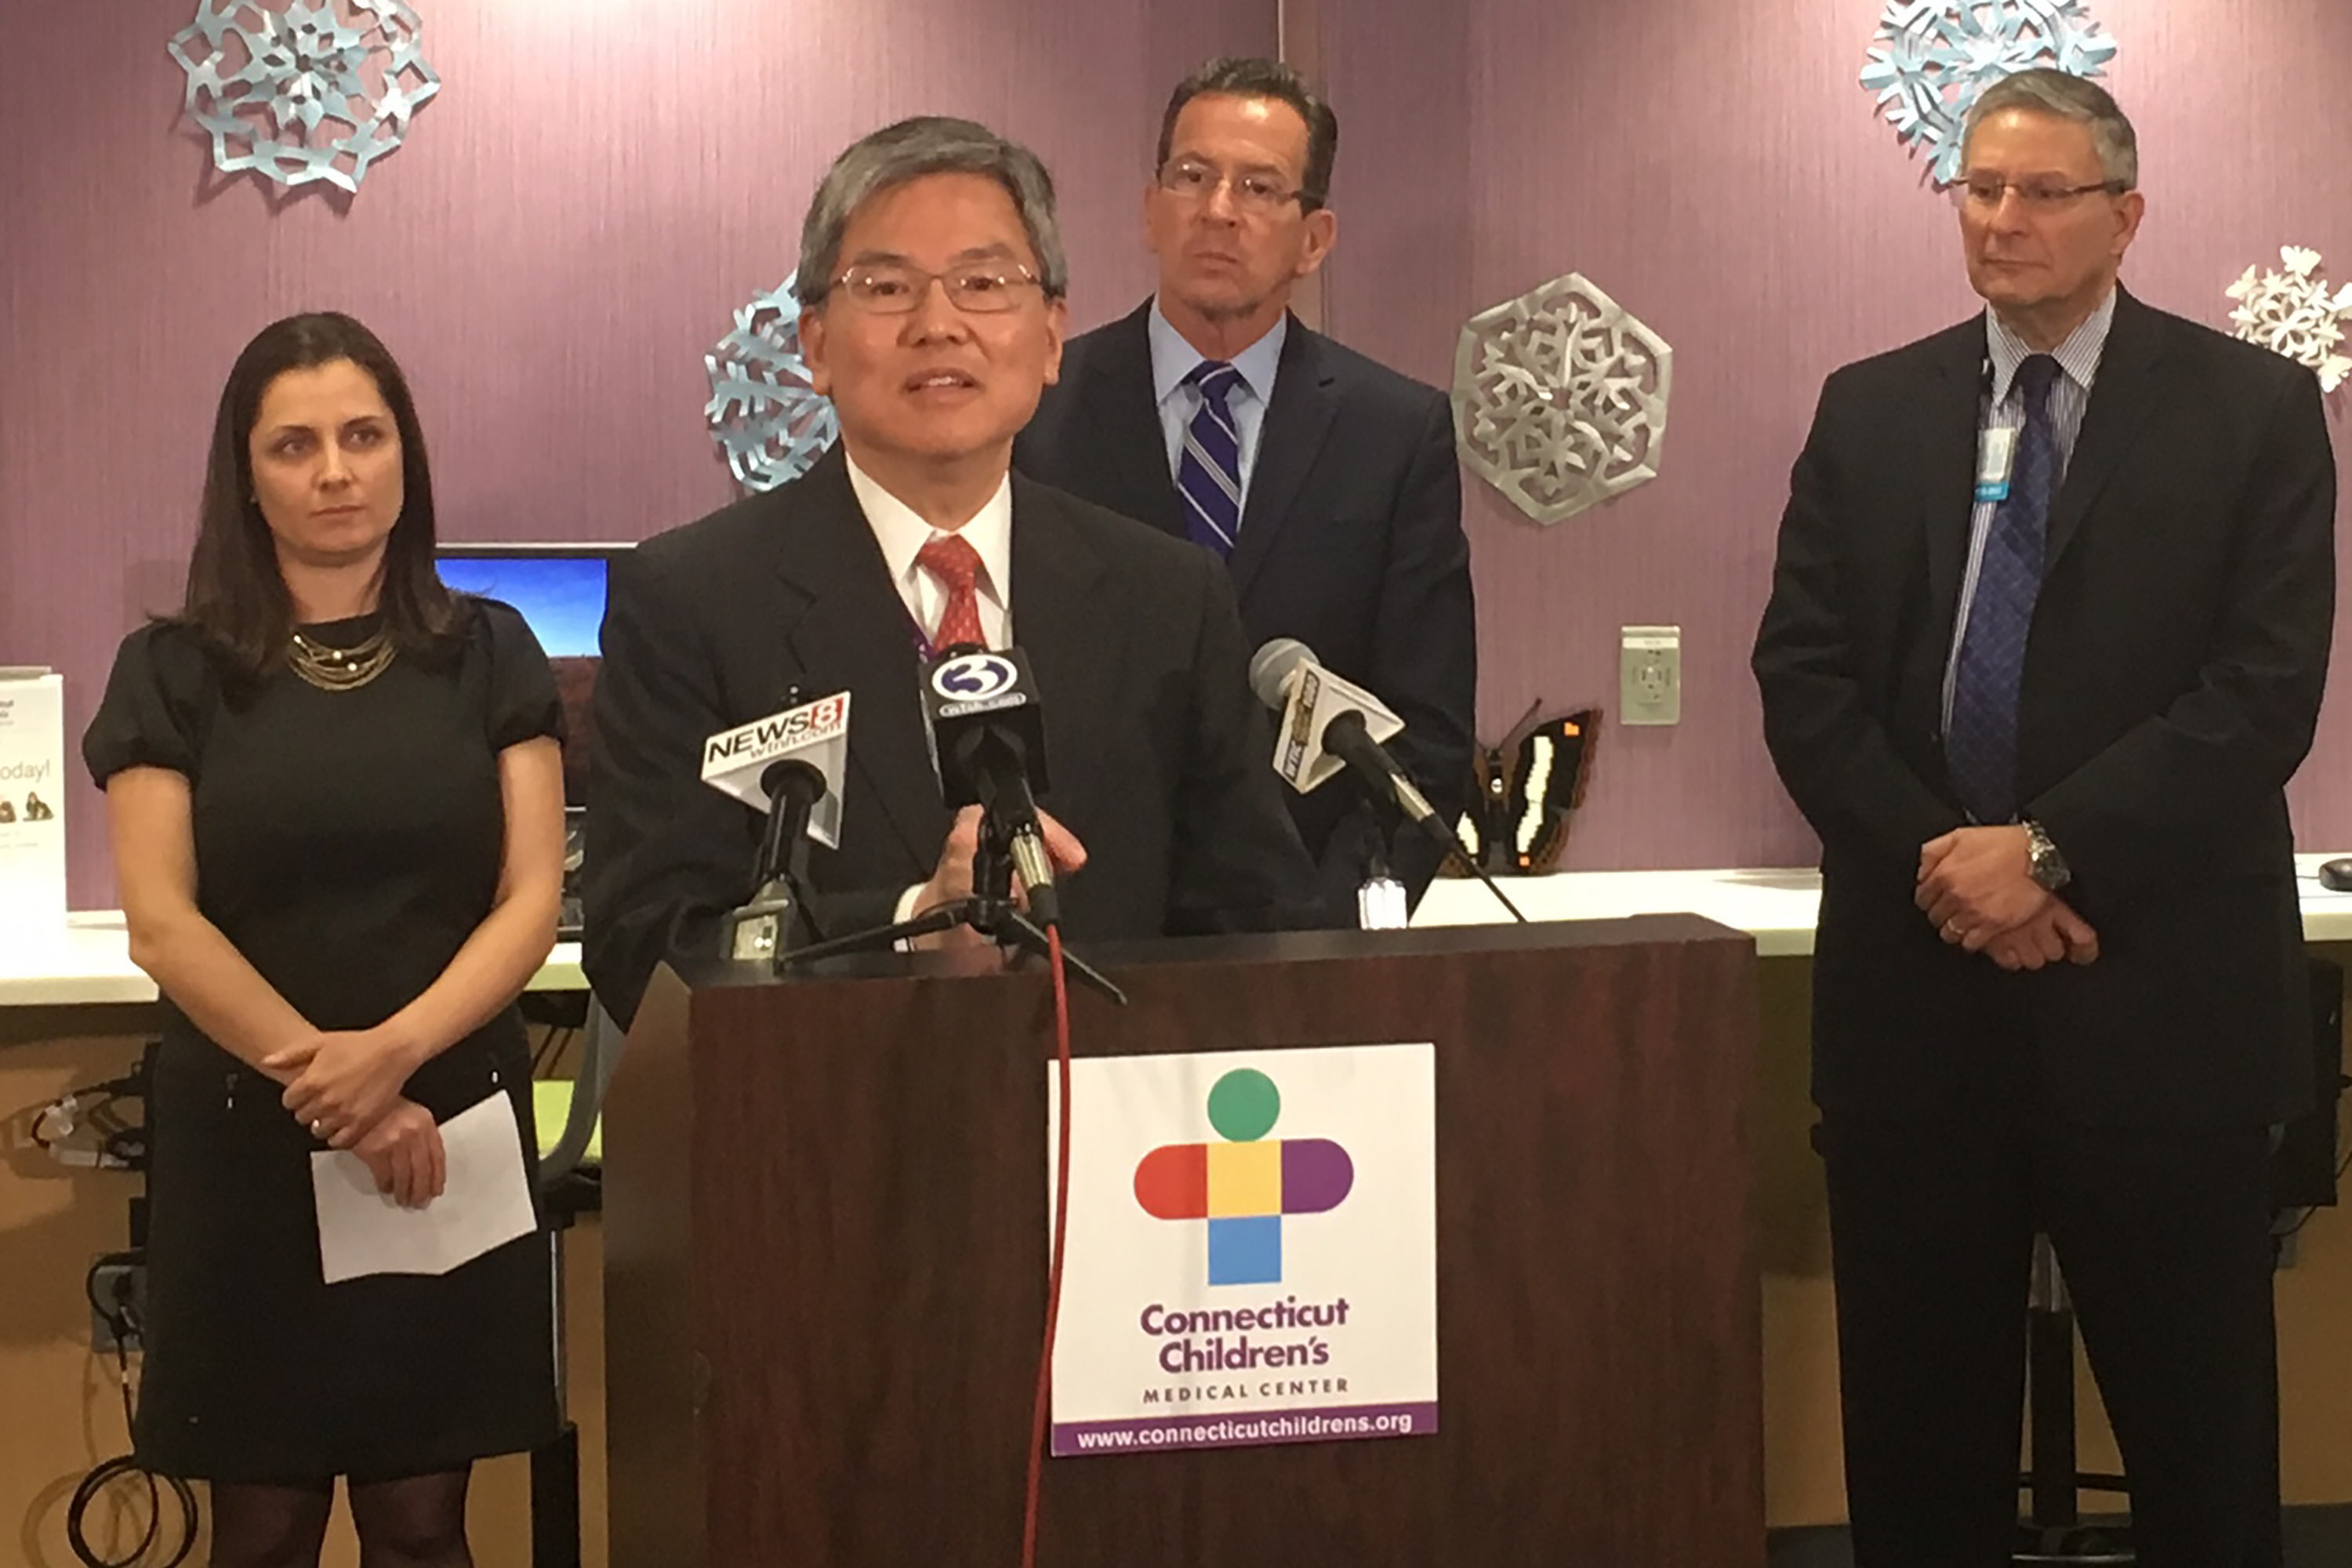 Dr. Ching Lau speaks at a press event to announce the 'Smash Childhood Cancer' global crowdsourcing research initiative. From left, Juan Hindo of IBM, Gov. Dannel P. Malloy, and Dr. Jim Shmerling, CEO of the Connecticut Children's Medical Center. (Lauren Woods/UConn Health Photo)